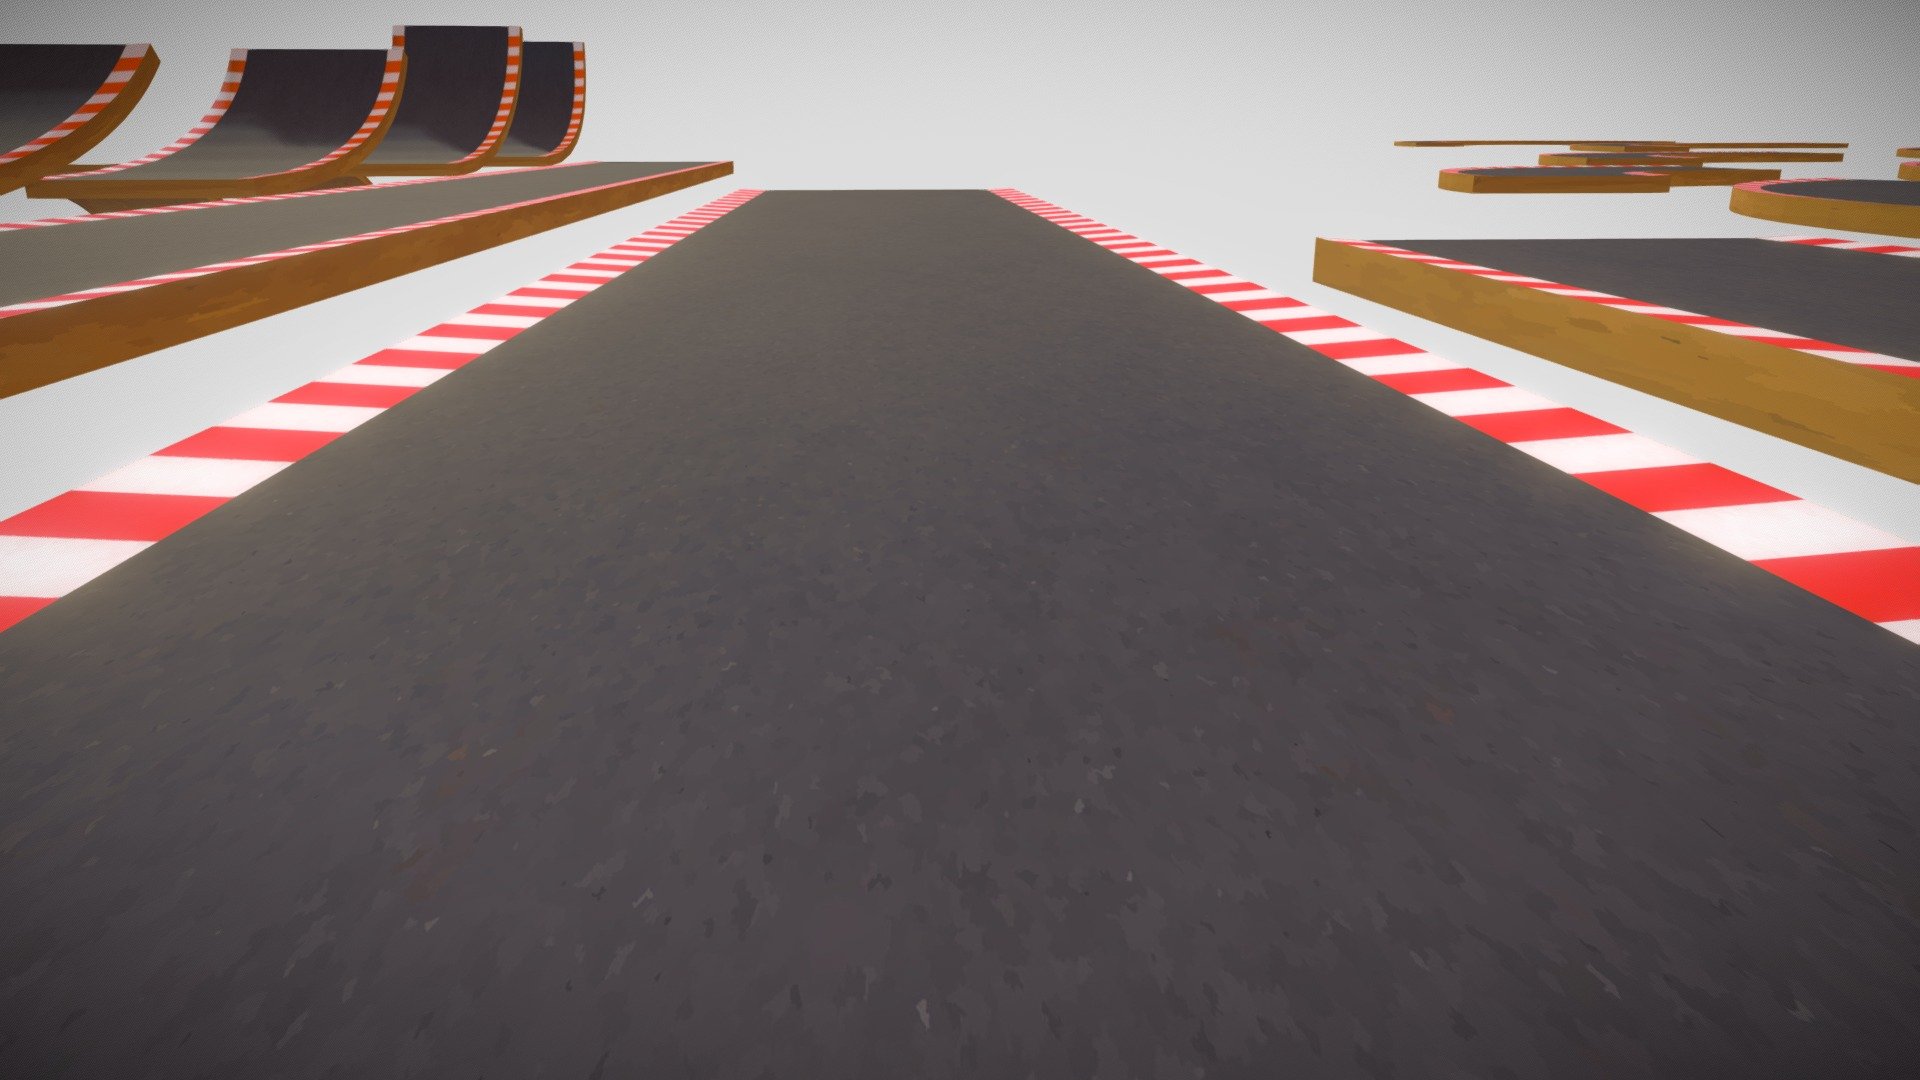 Stylized low-poly roads you can use to create any type road from flat tracks to twisting sideway roads for stunts! It is modular so you can create your tracks however you want. The roads have a stylized anime-like texture 3d model